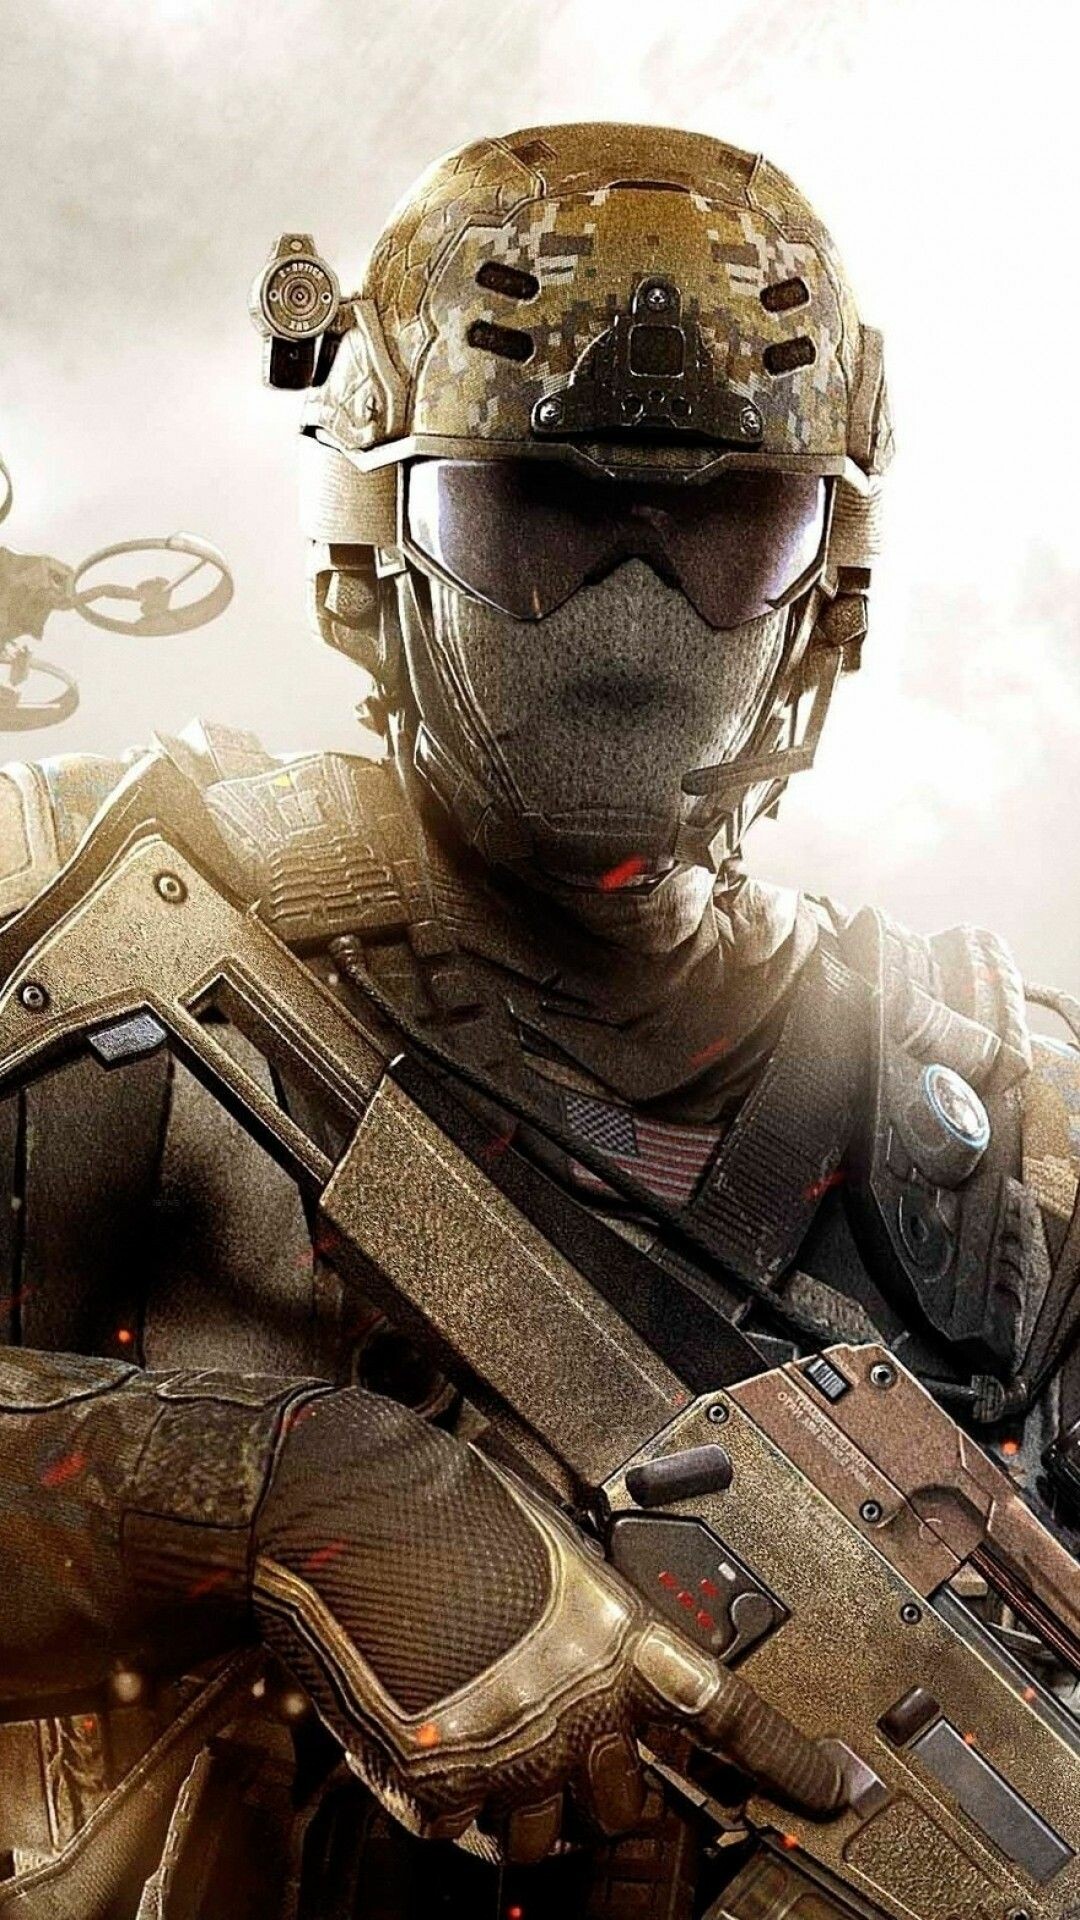 Call of Duty: A first-person shooter published by Activision, CoD. 1080x1920 Full HD Wallpaper.